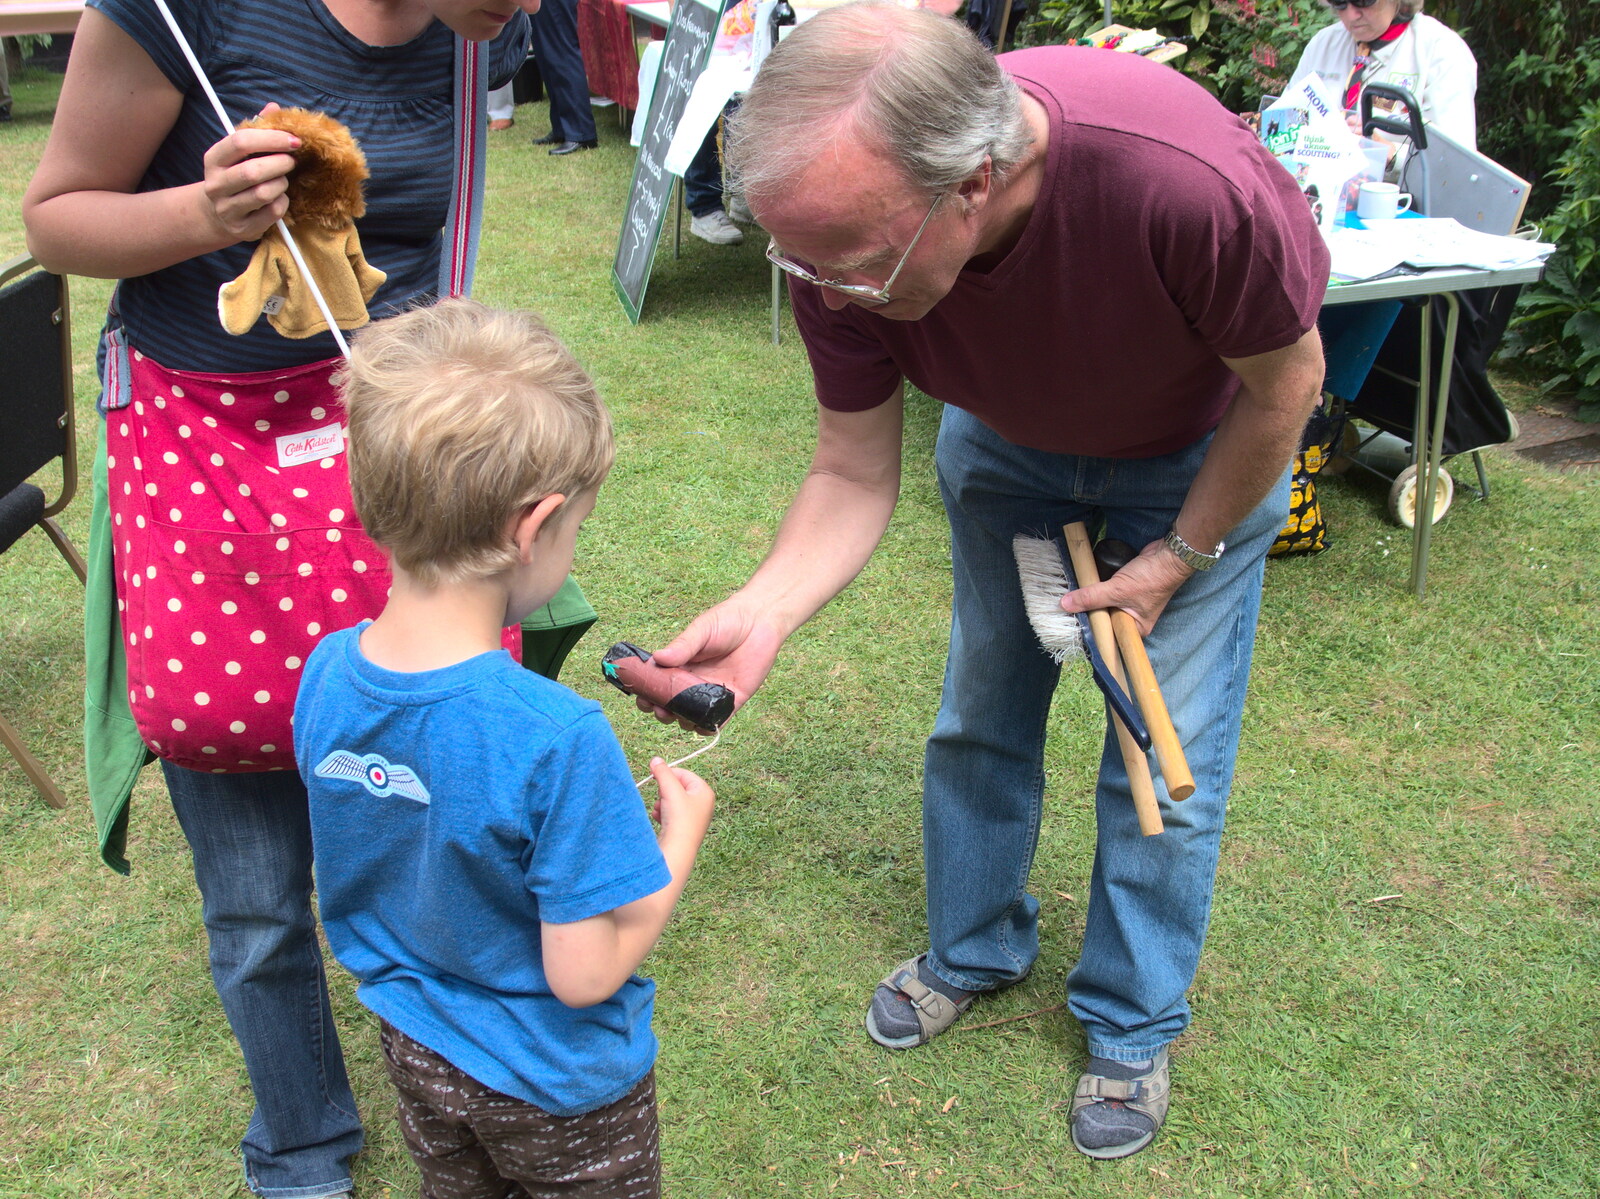 Fred gets shown the 'rat' from A Busy Day and a Church Fair, Diss, Norfolk - 28th June 2014